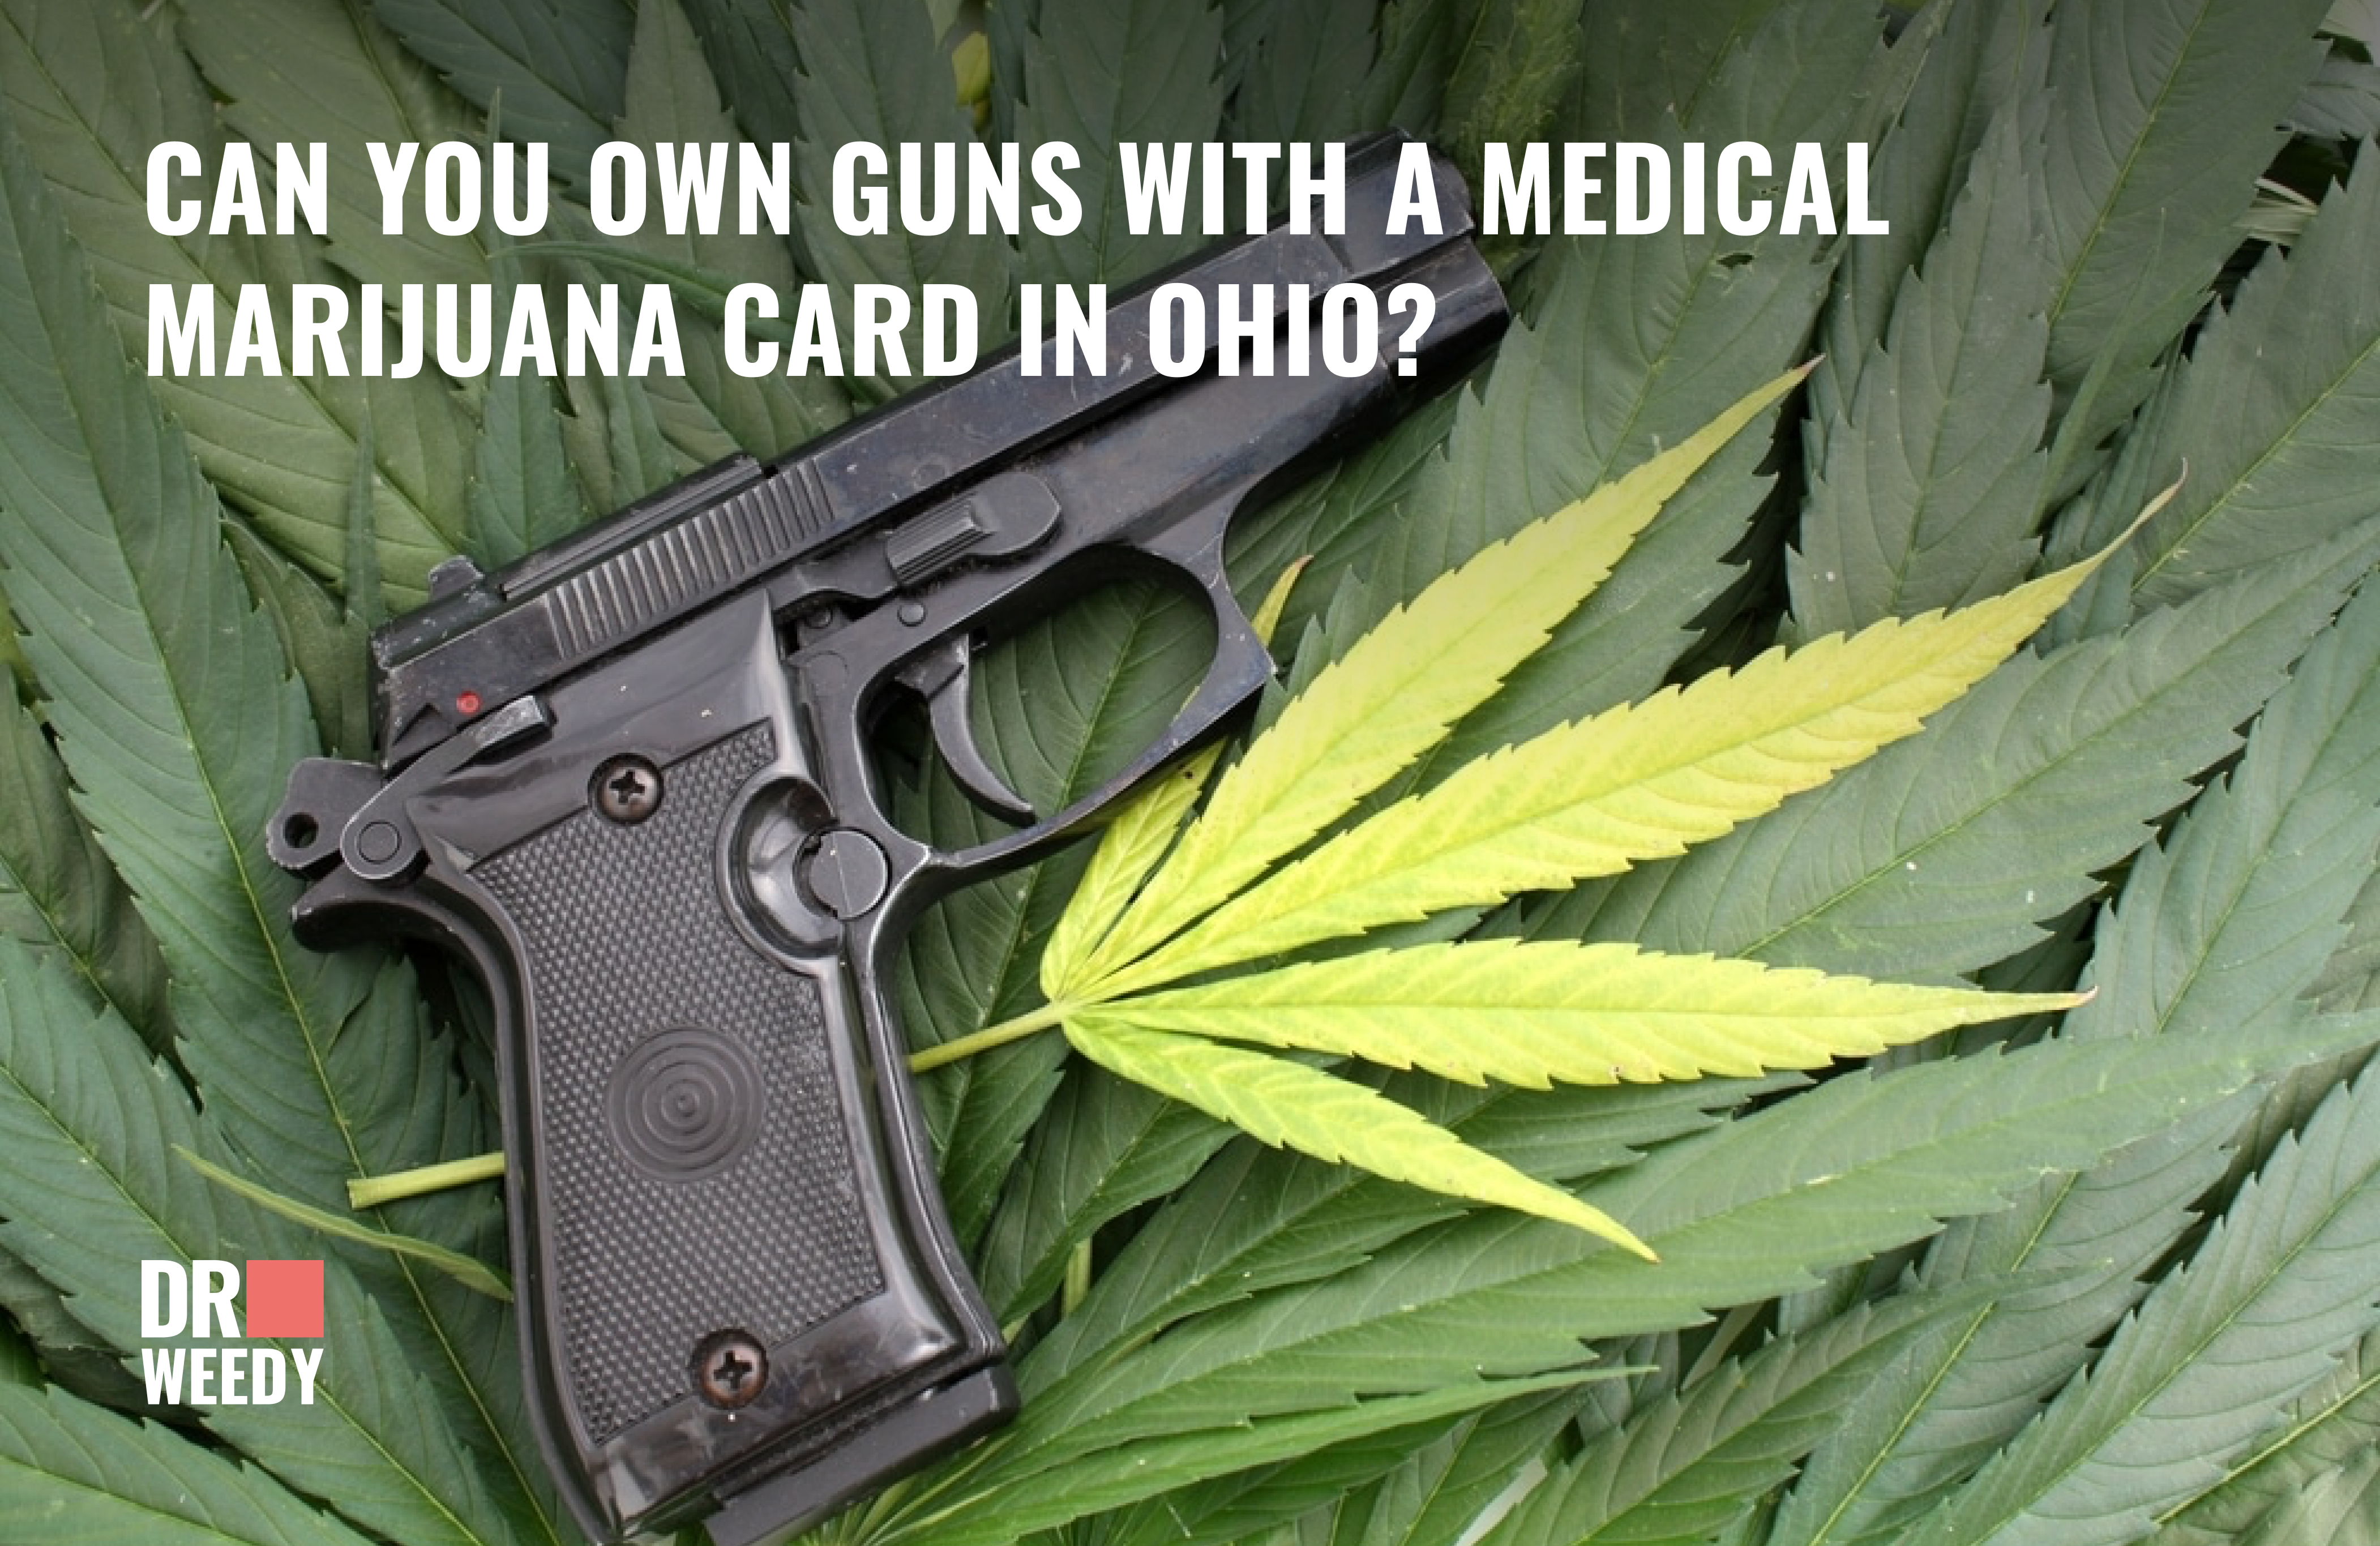 Can You Own Guns With A Medical Marijuana Card In Ohio?